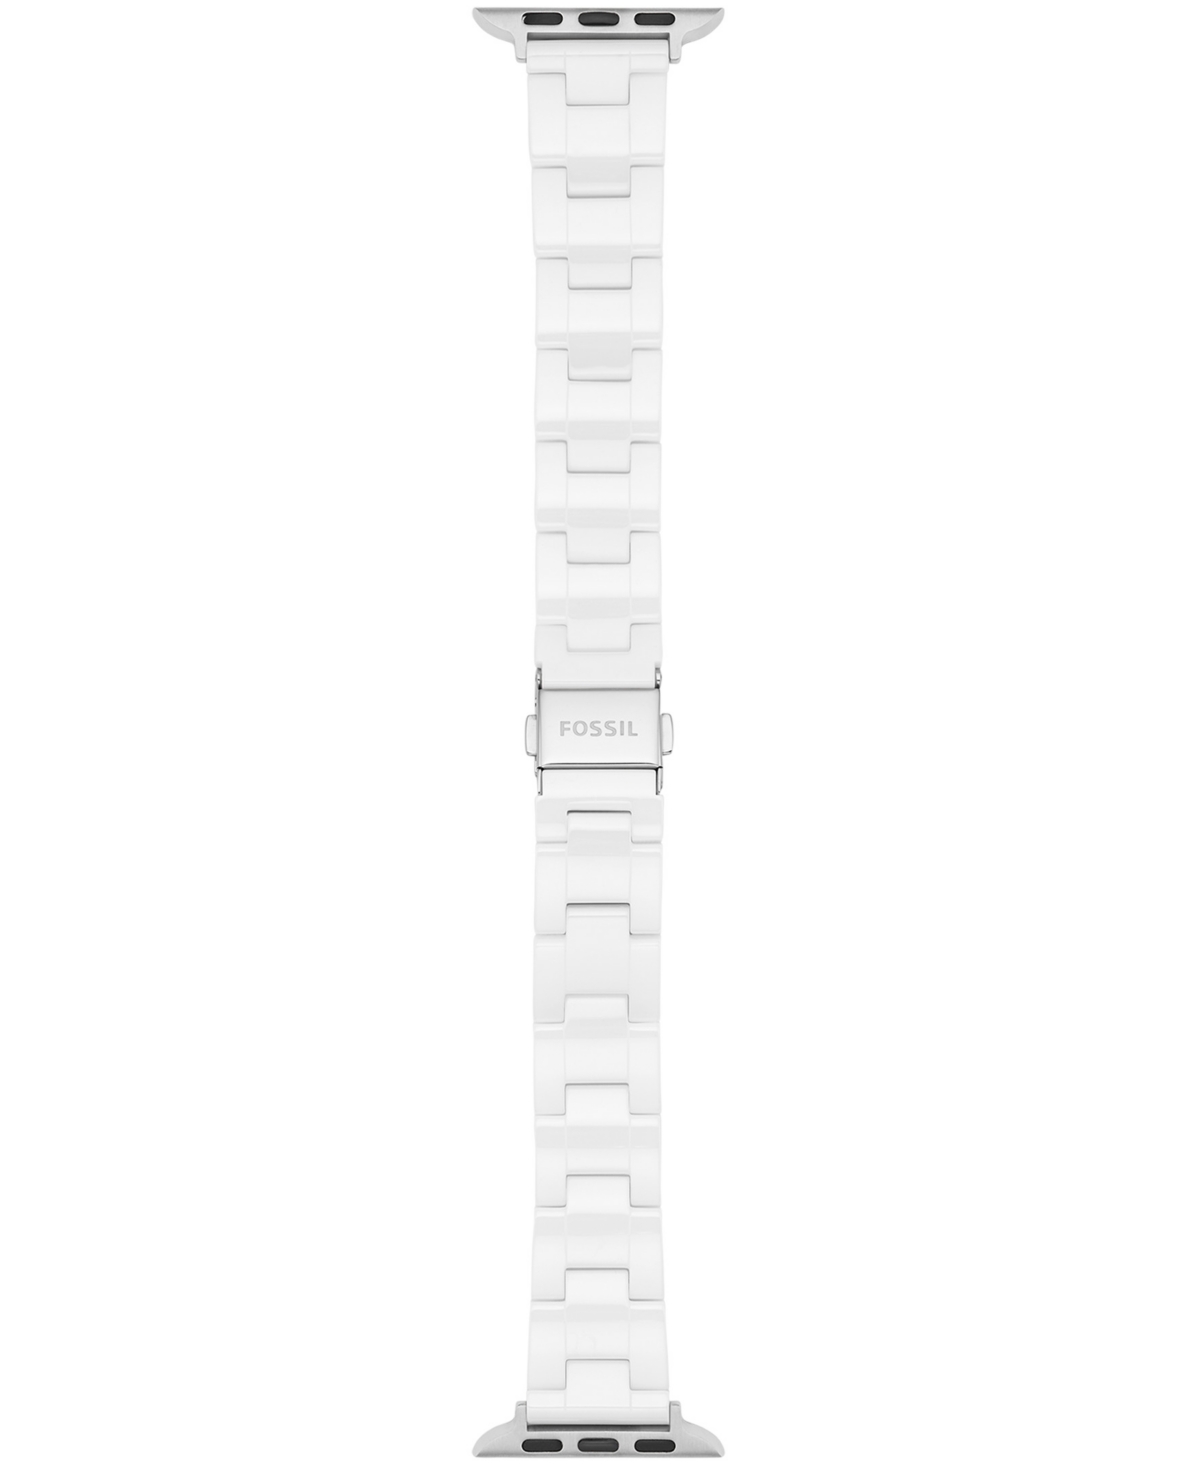 Fossil White Ceramic Band For Apple Watch, 38 40, 41mm